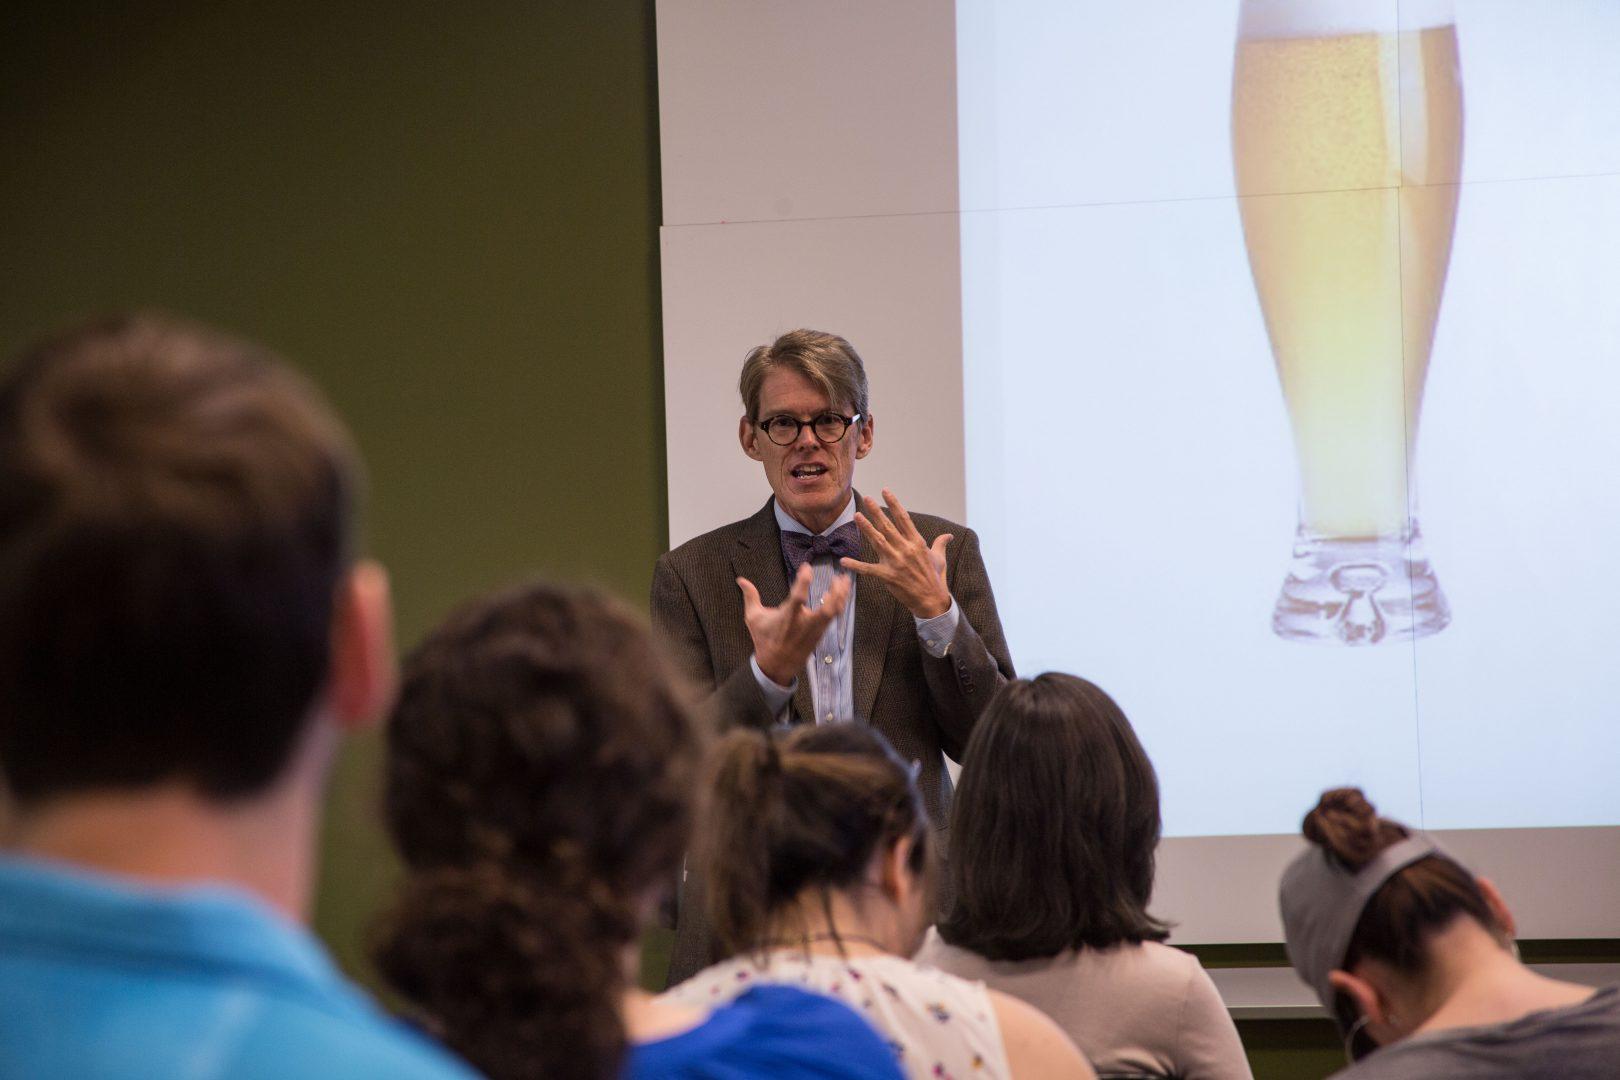 Dr. Jeffrey Pilcher gives a talk on beer history to students in the Henry Madden Library on May 2, 2017.